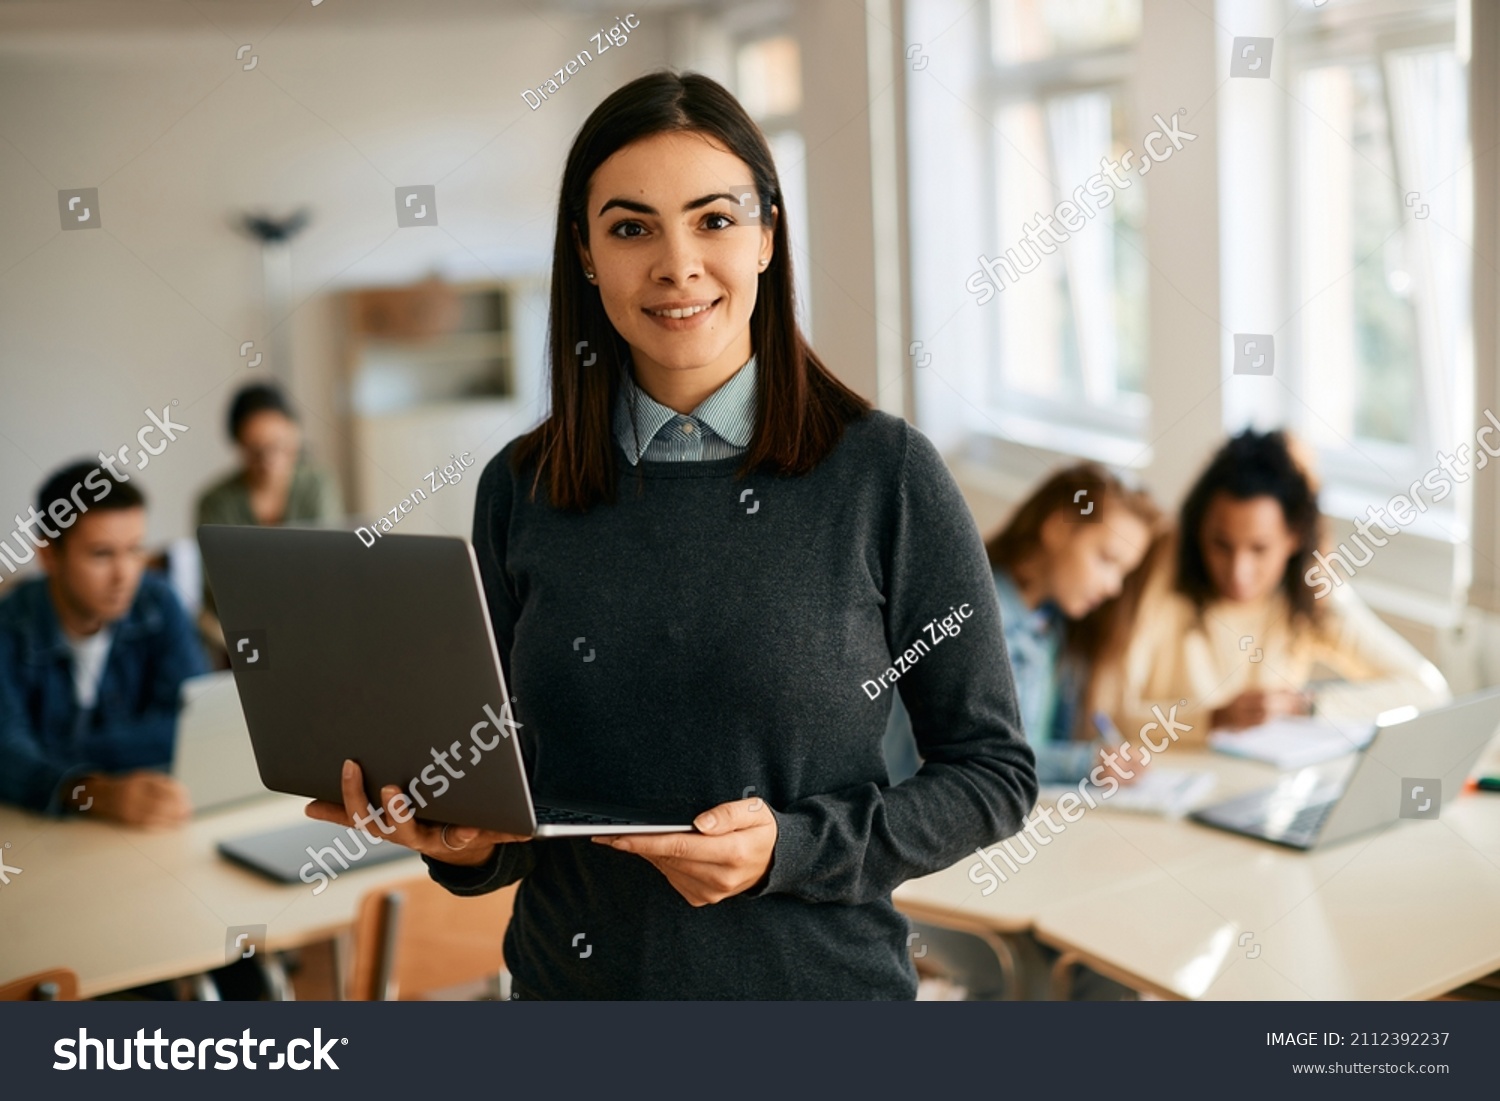 Smiling teacher using laptop during computer class at high school and looking at camera. Her students are learning in the background.  #2112392237